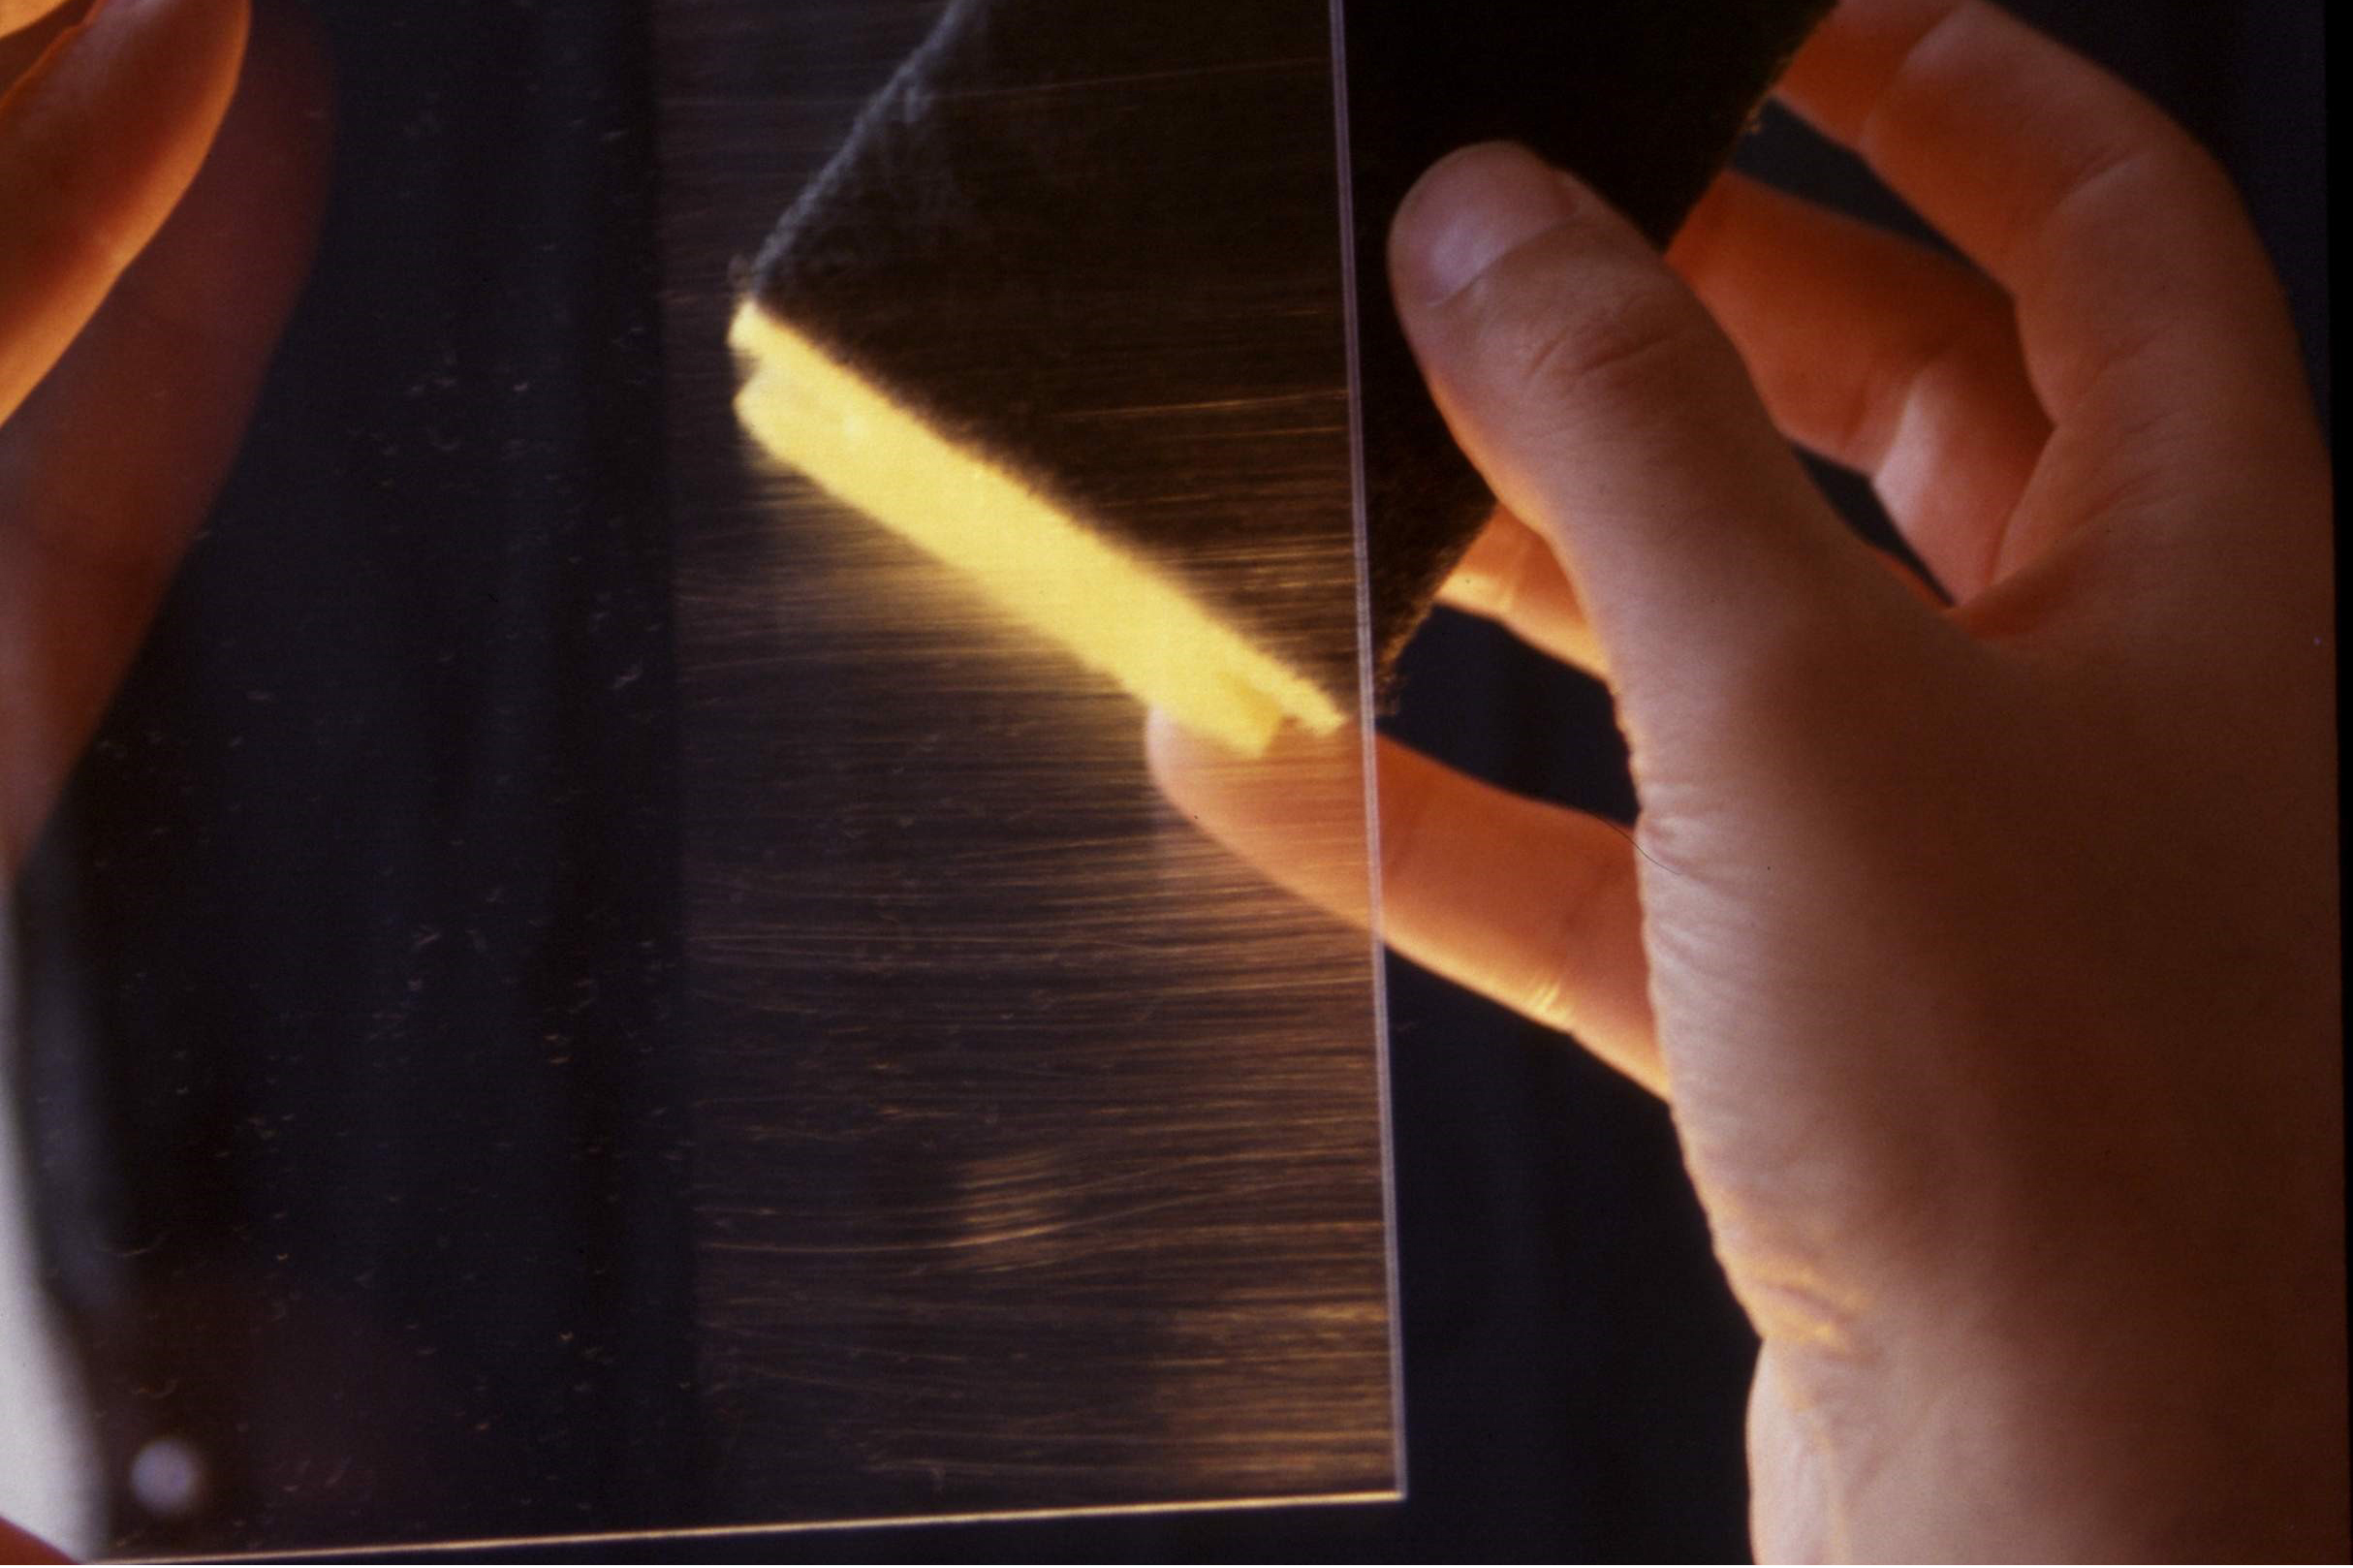 Transparent pane shows scratch marks from a rinsing sponge on the right half, while the left side of the pane shows no scratches due to a scratch protection layer.